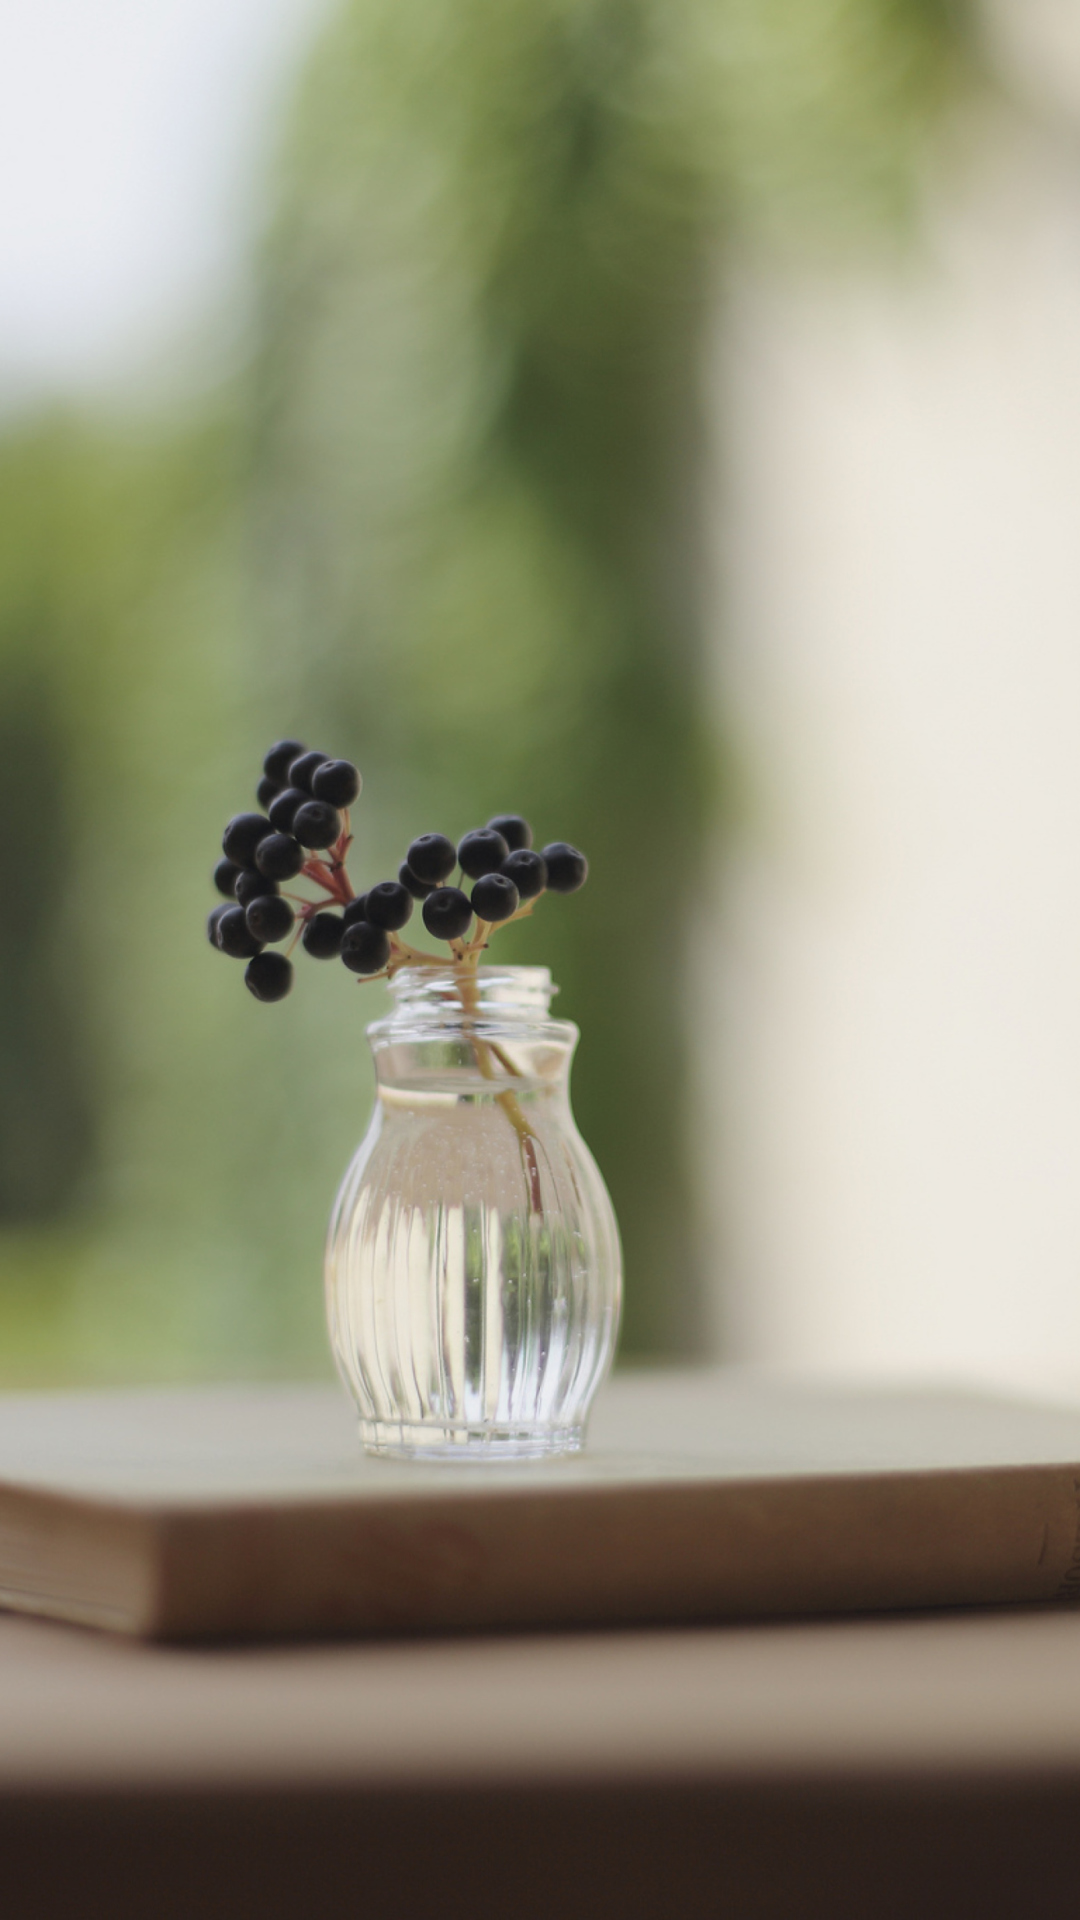 Little Vase And Berry Branch screenshot #1 1080x1920